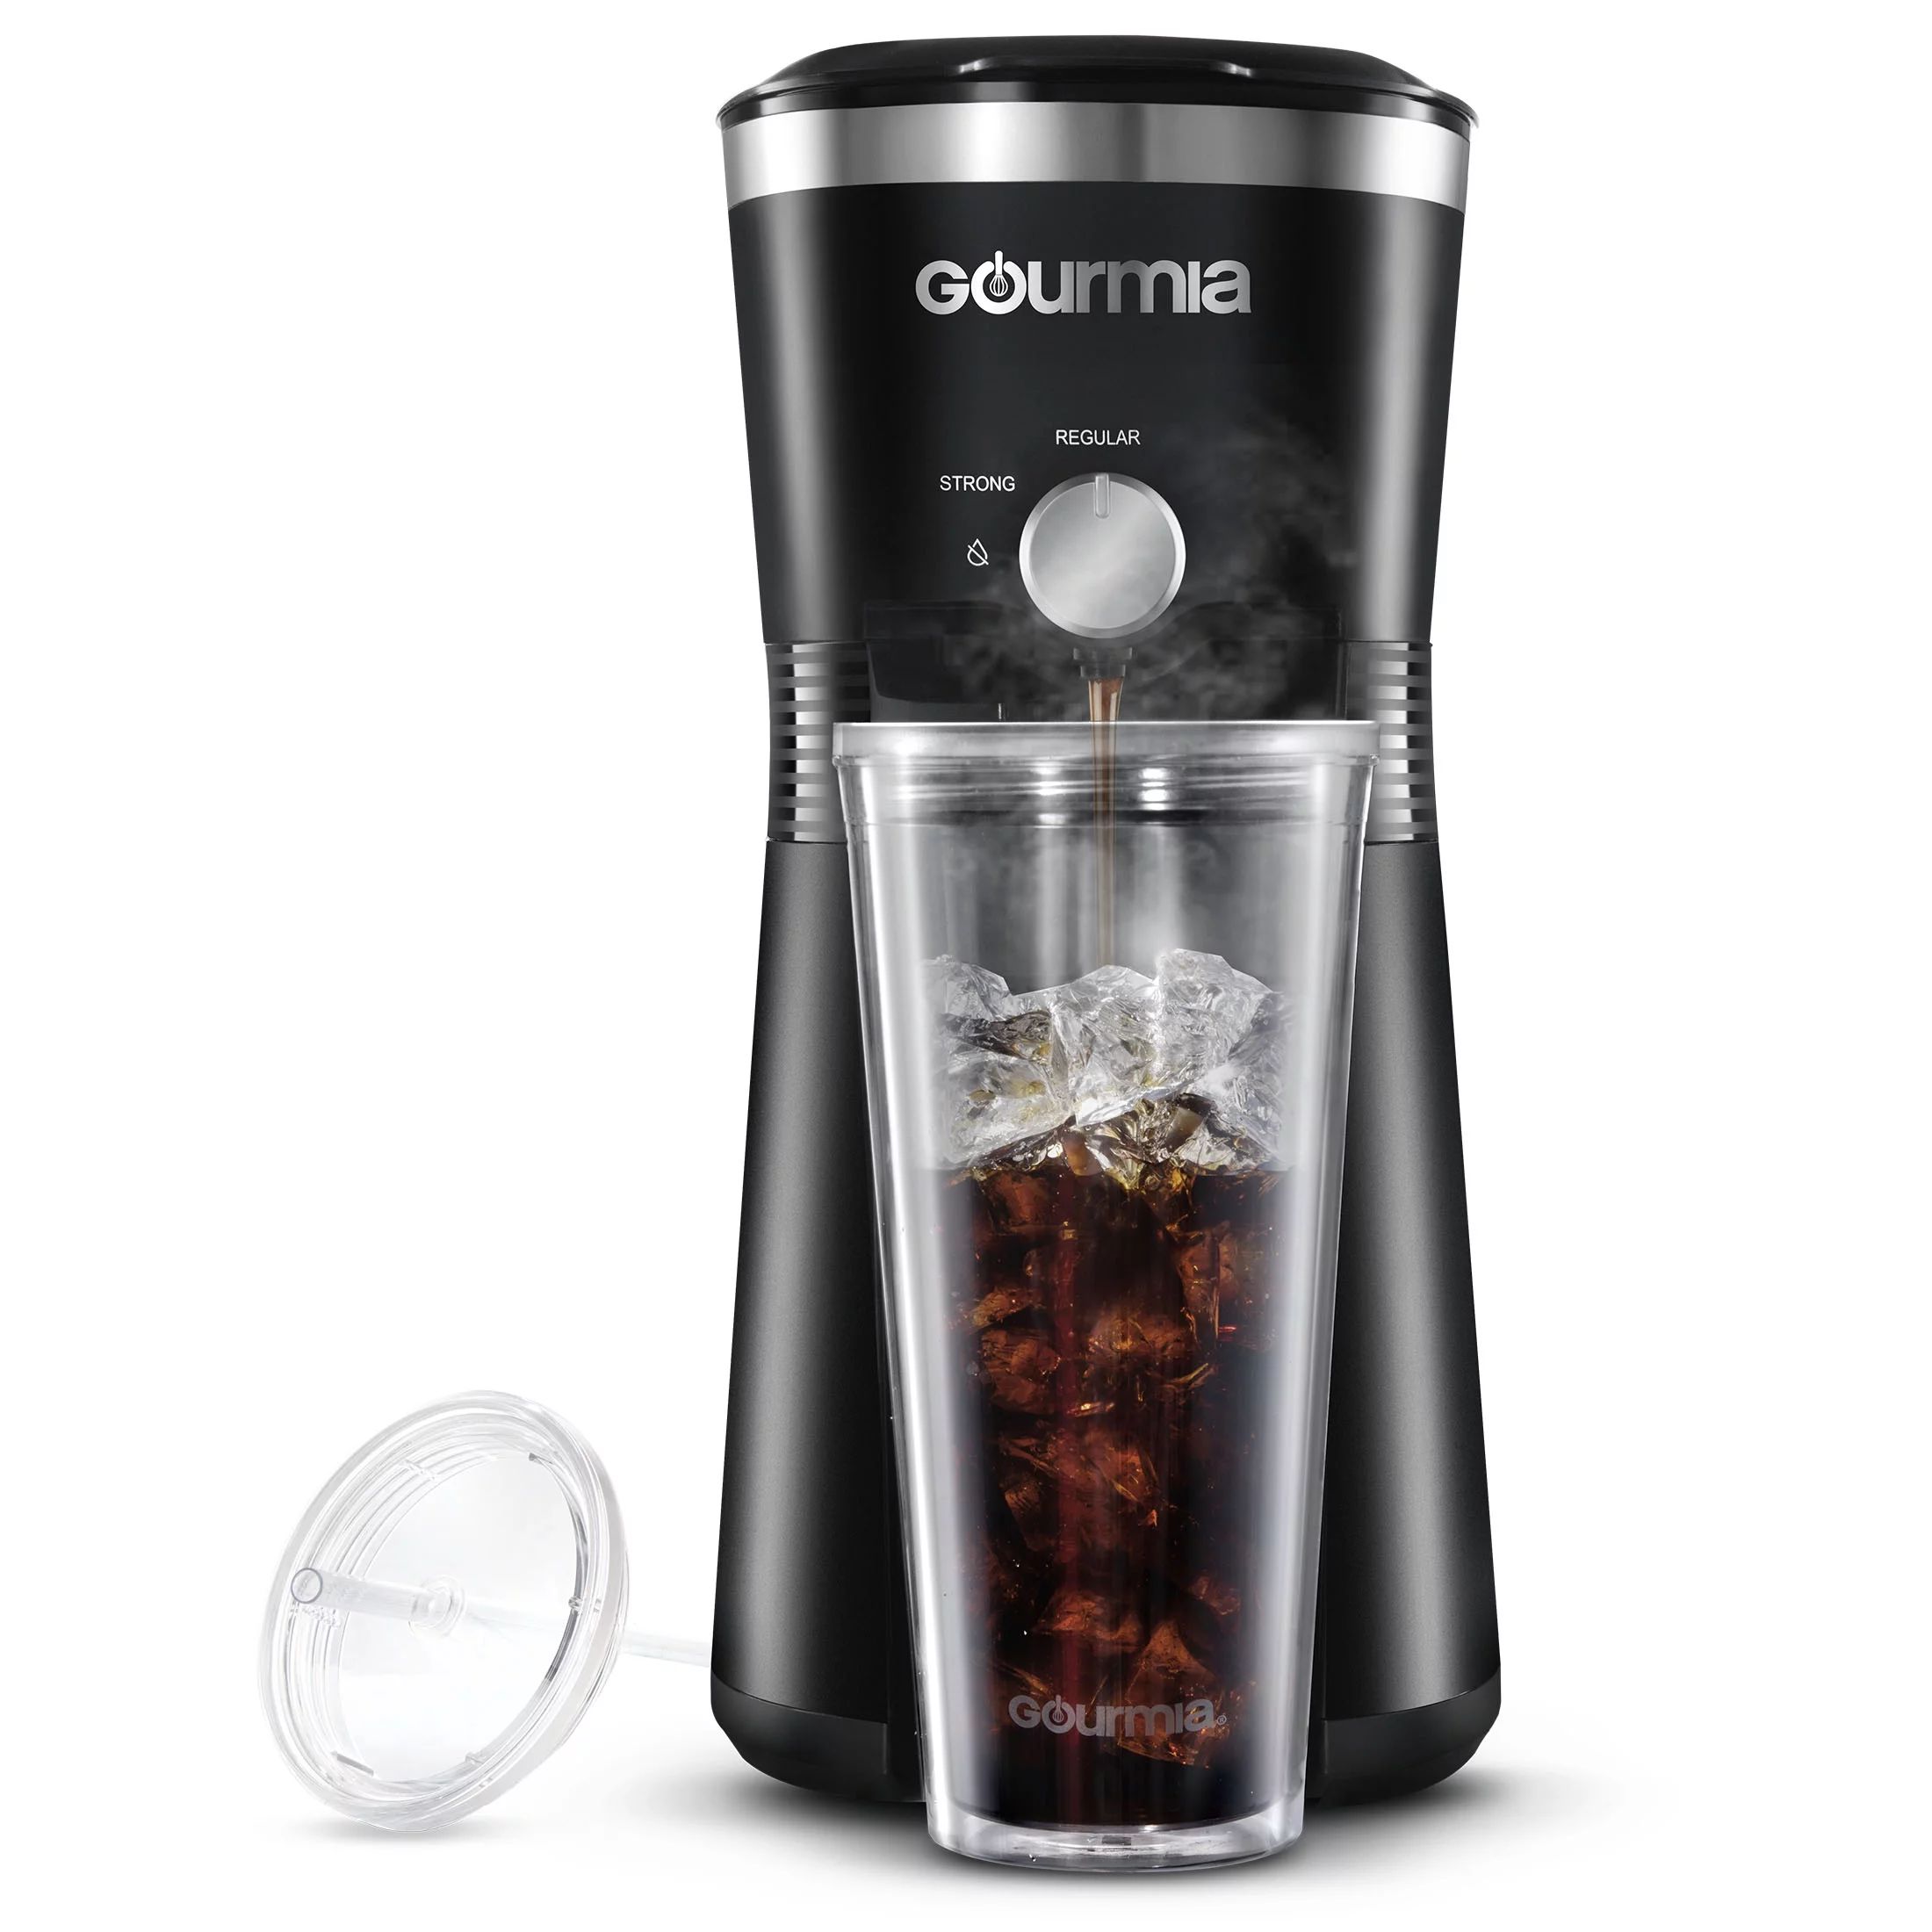 Gourmia Iced Coffee Maker with Brew-Strength Control, Reusable Filter and Tumbler, Black | Walmart (US)